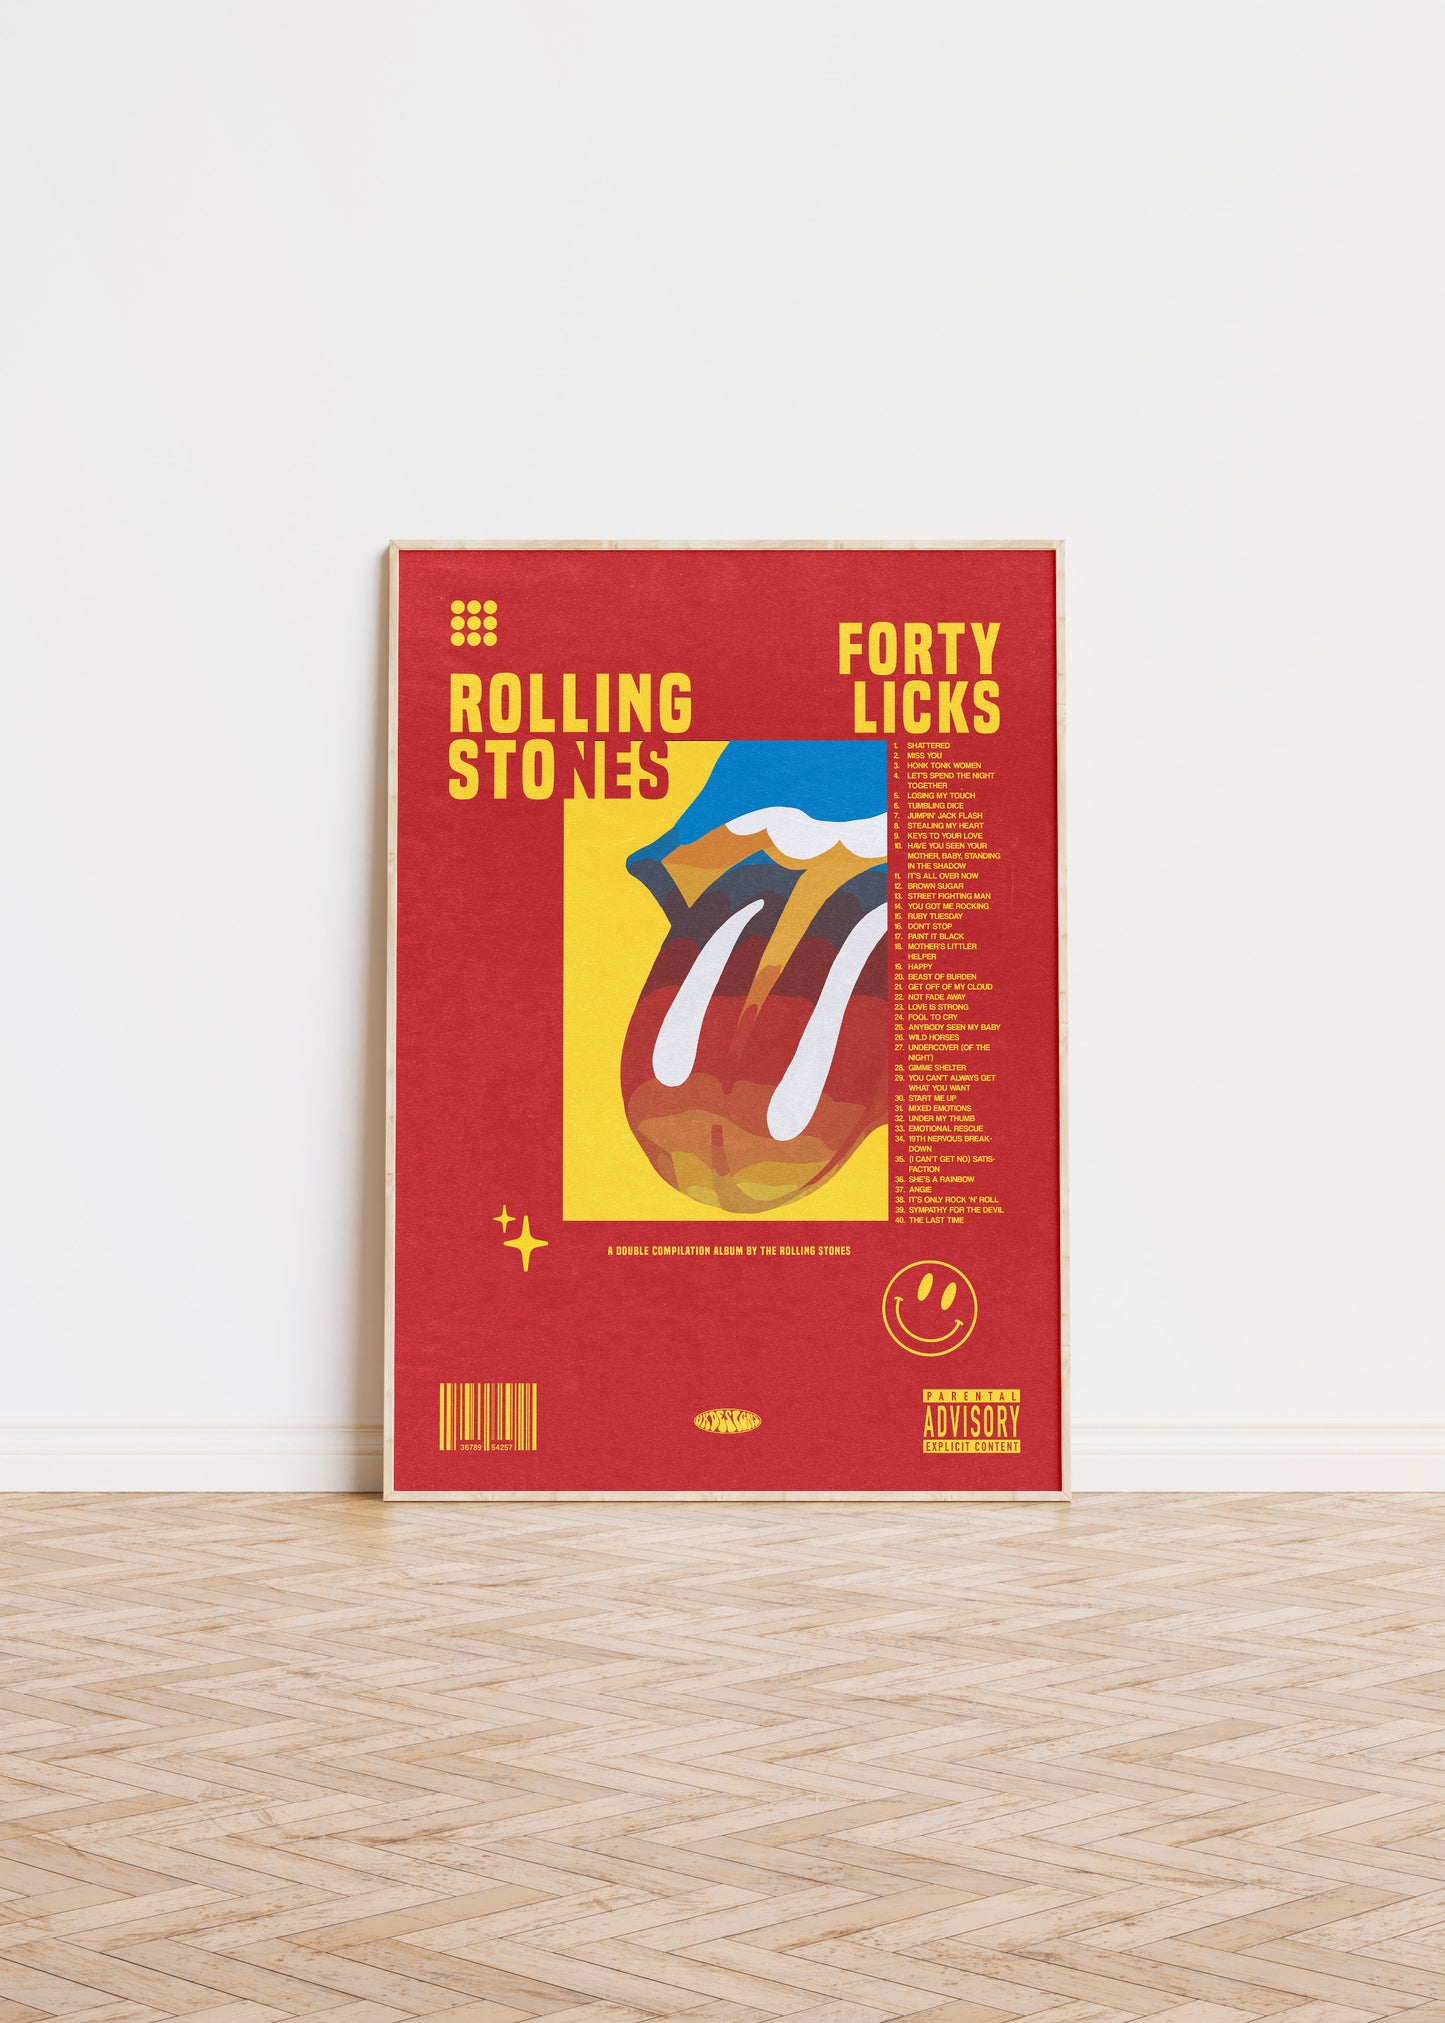 'Forty Licks' by Rolling Stones